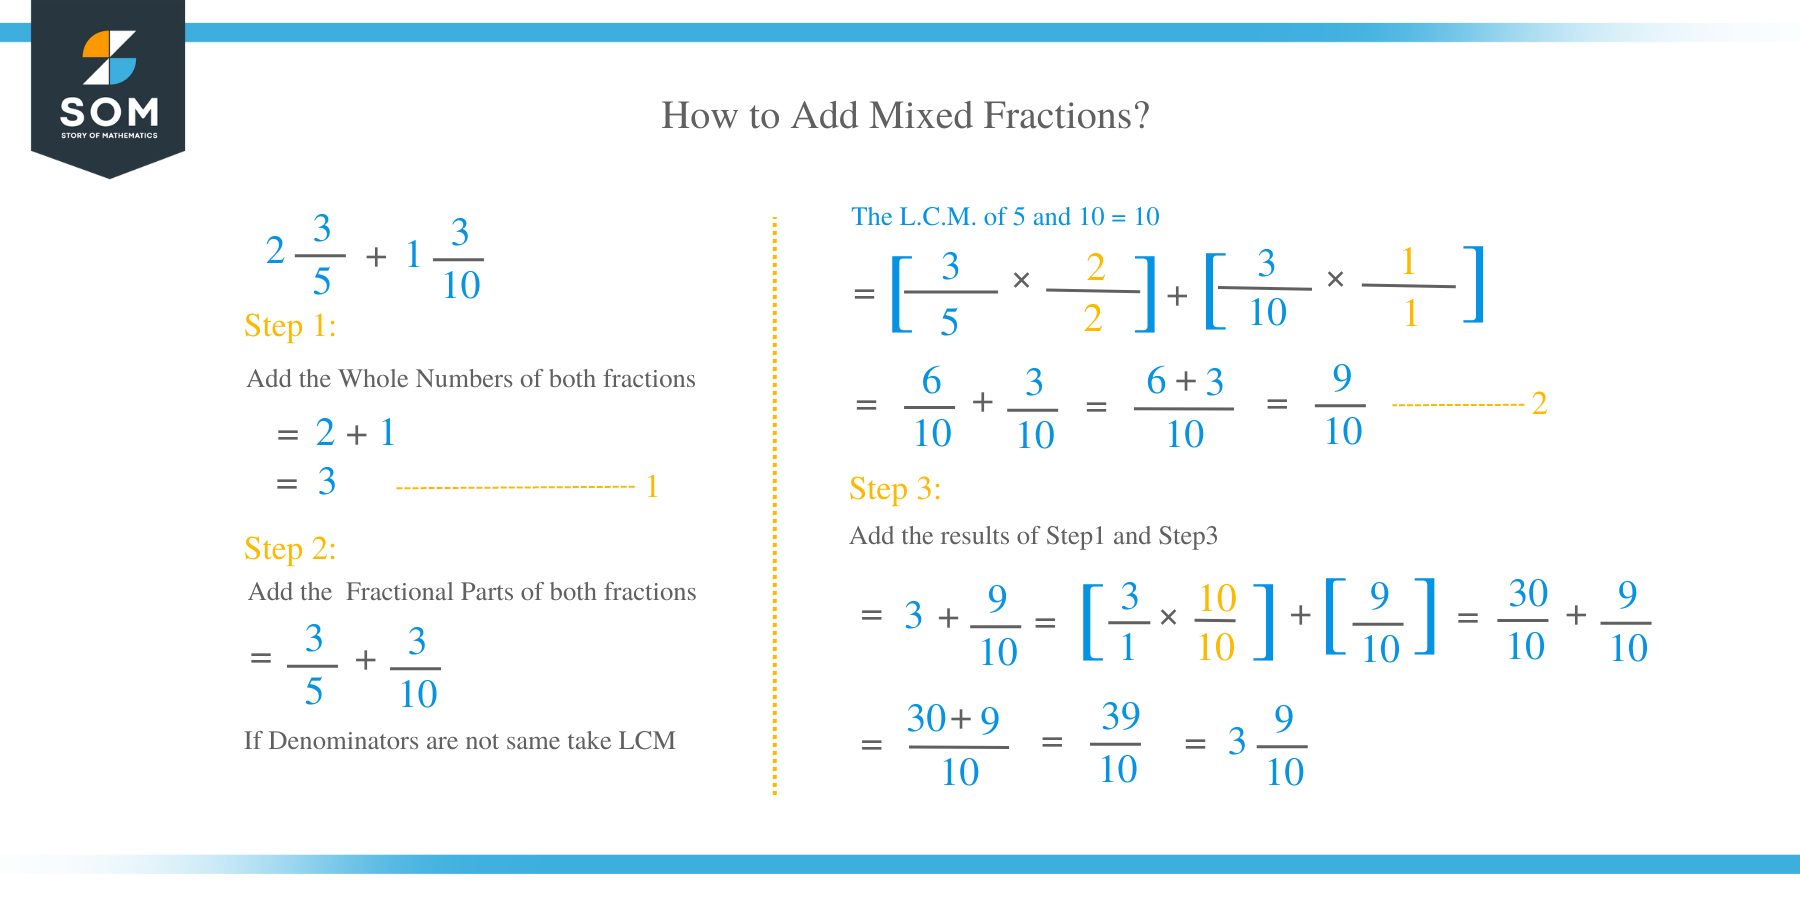 How to Add Mixed Fractions?